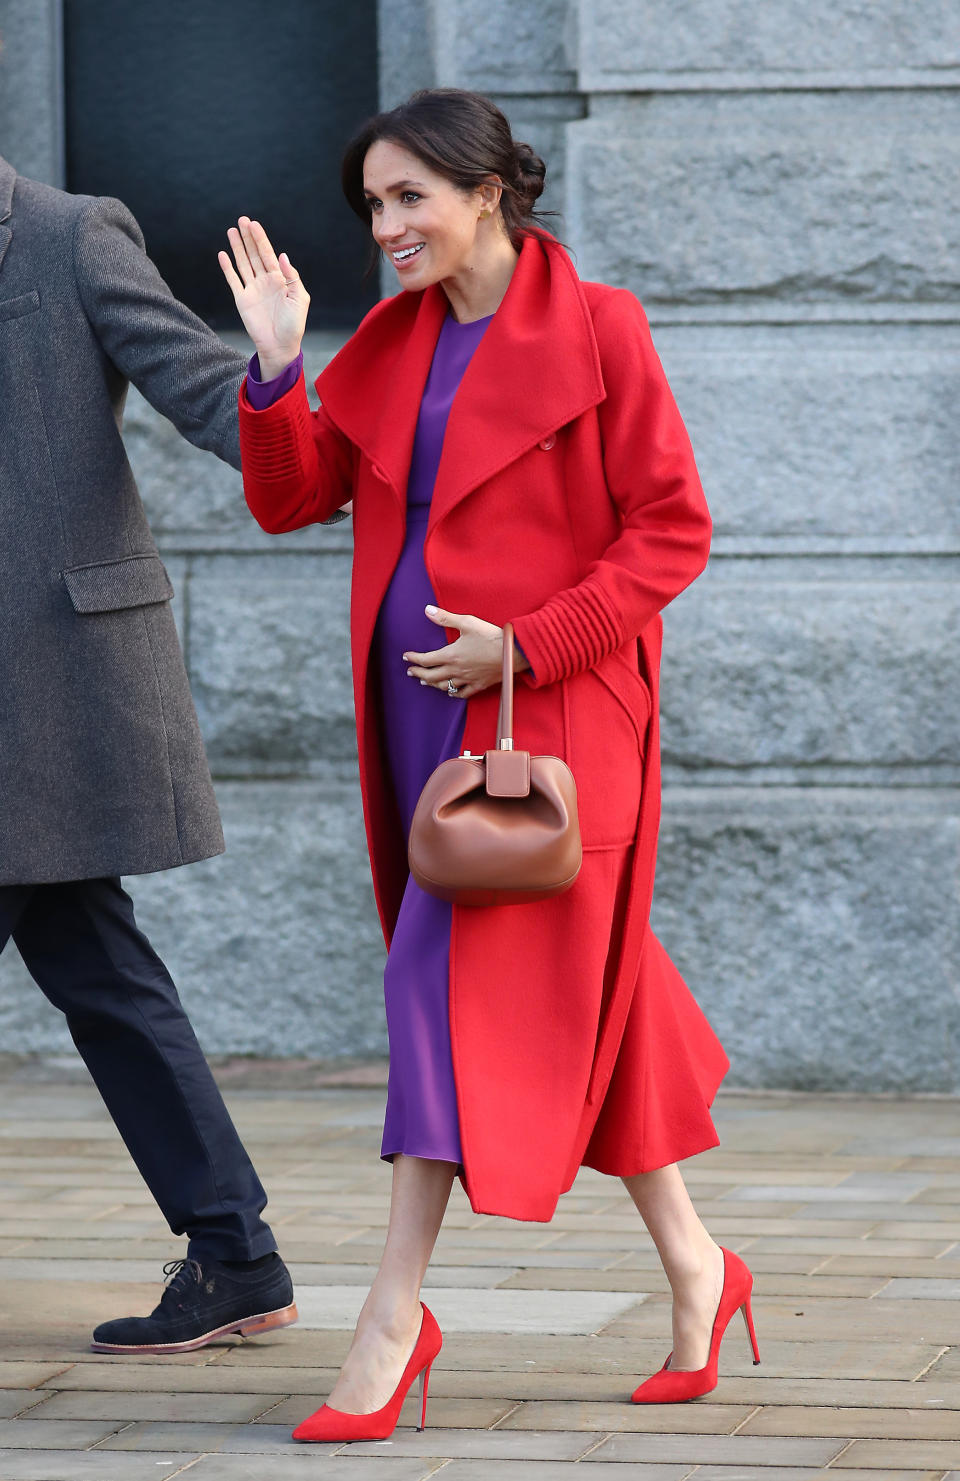 <p> A color-blocking expert! Meghan donned her red Sentaler coat with an Aritzia dress she later wore in 2019 post-pregnancy. Matching red Stuart Weitzman pumps made the whole look feel cohesive and appropriate for the formality of the event. A brown Gabriela Hearst bag served as a more neutral contrast. At the time, her look drew comparisons to both the late Princess Diana and the Queen, who both used color and color-blocking to great effect at public affairs. </p>